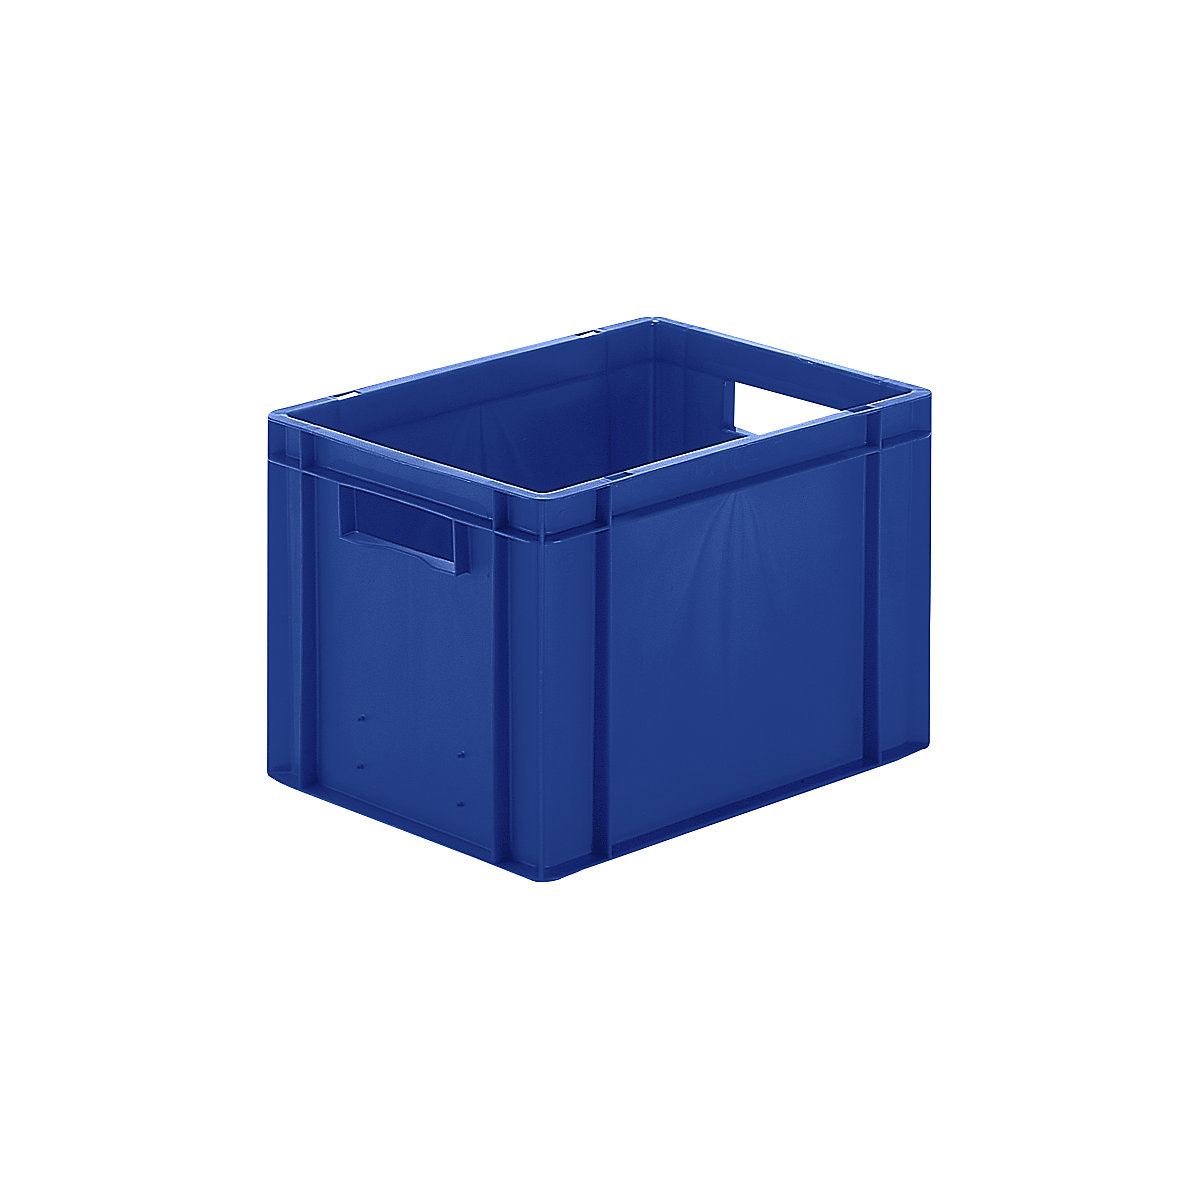 Euro stacking container, closed walls and base, LxWxH 400 x 300 x 270 mm, blue, pack of 5-8